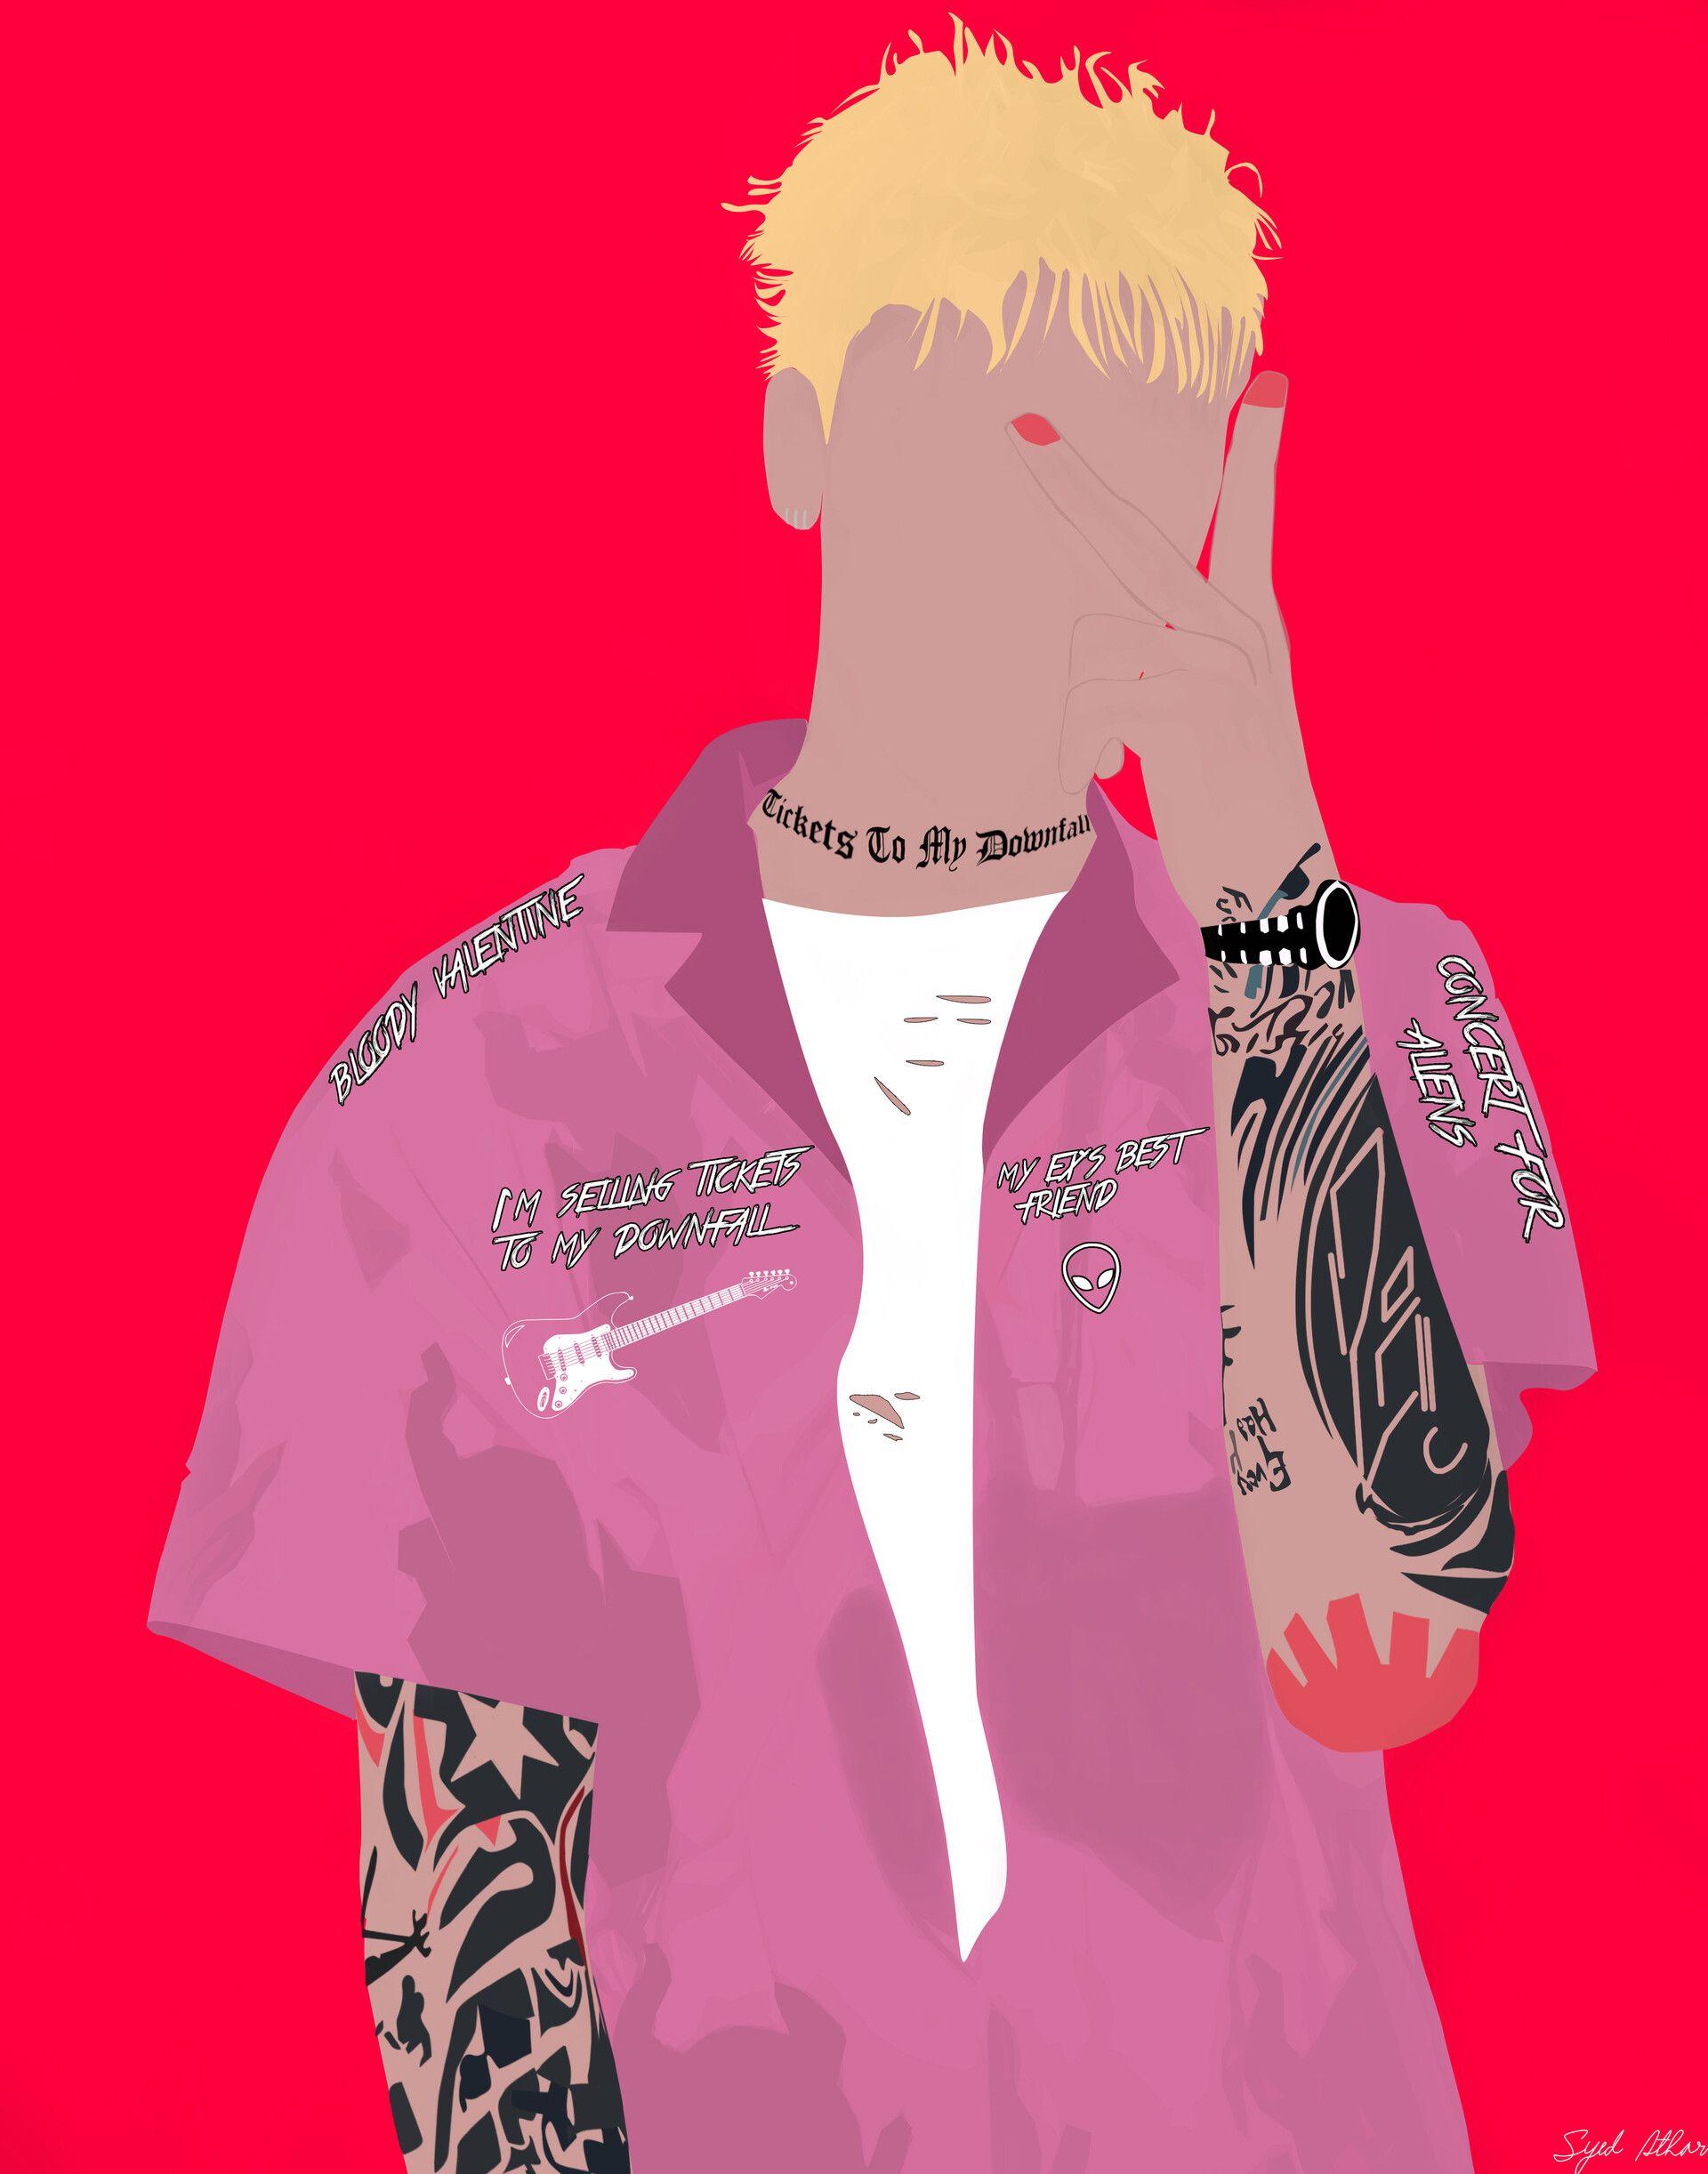 Download Machine Gun Kelly  Tickets To My Downfall Wallpaper  Wallpapers com